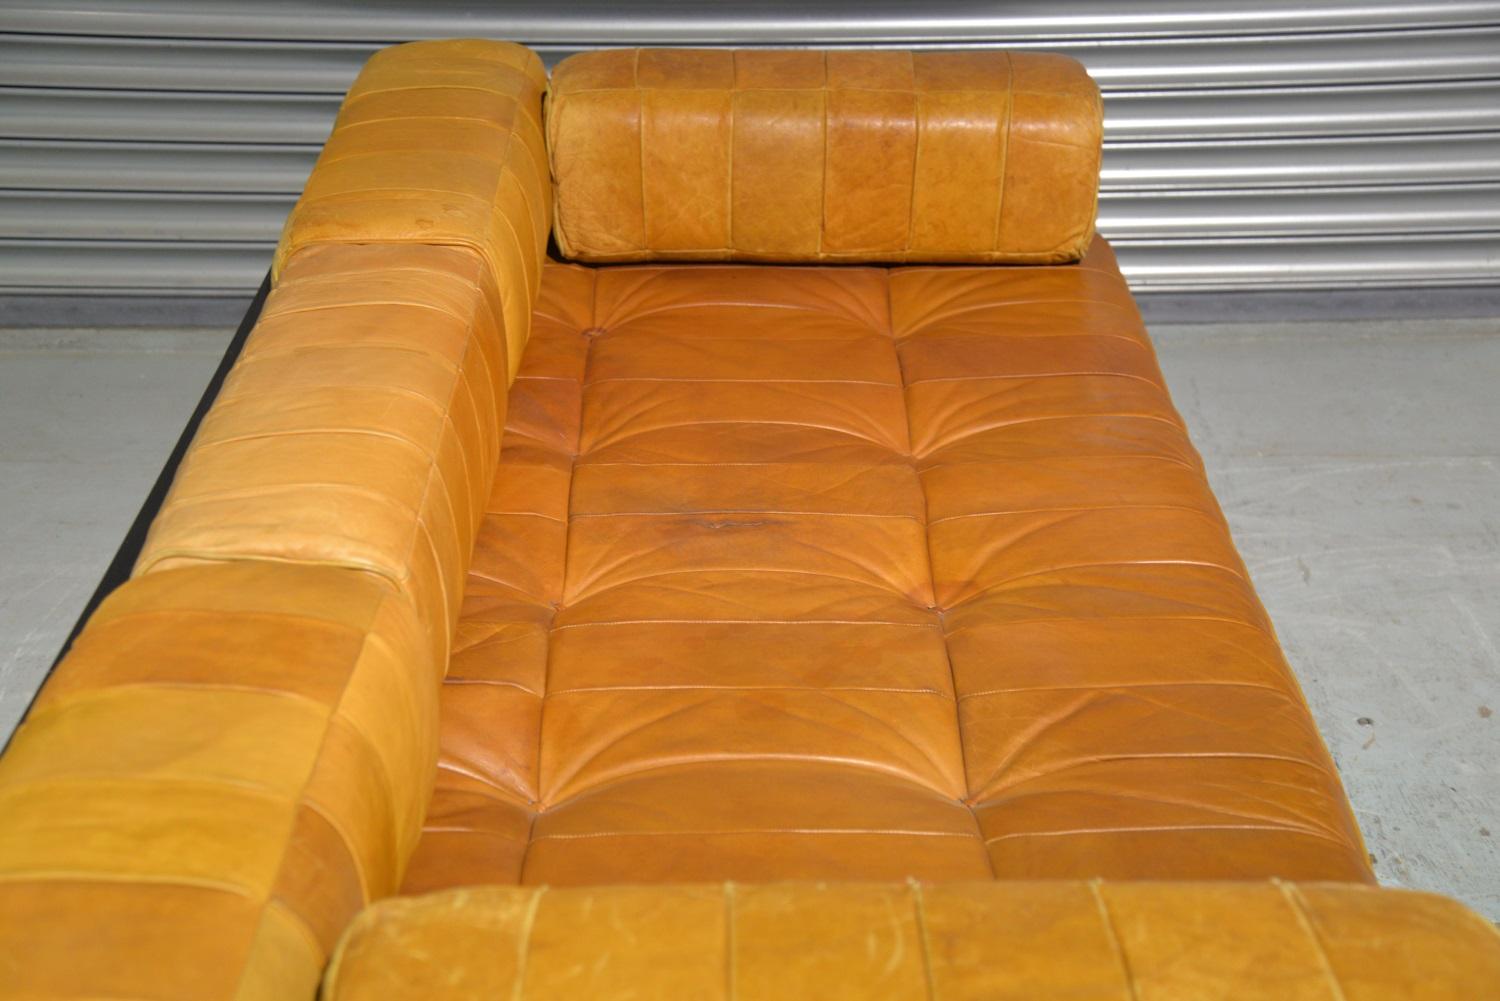 Vintage De Sede Ds 80 Patchwork Leather Daybed, Switzerland 1960s For Sale 11